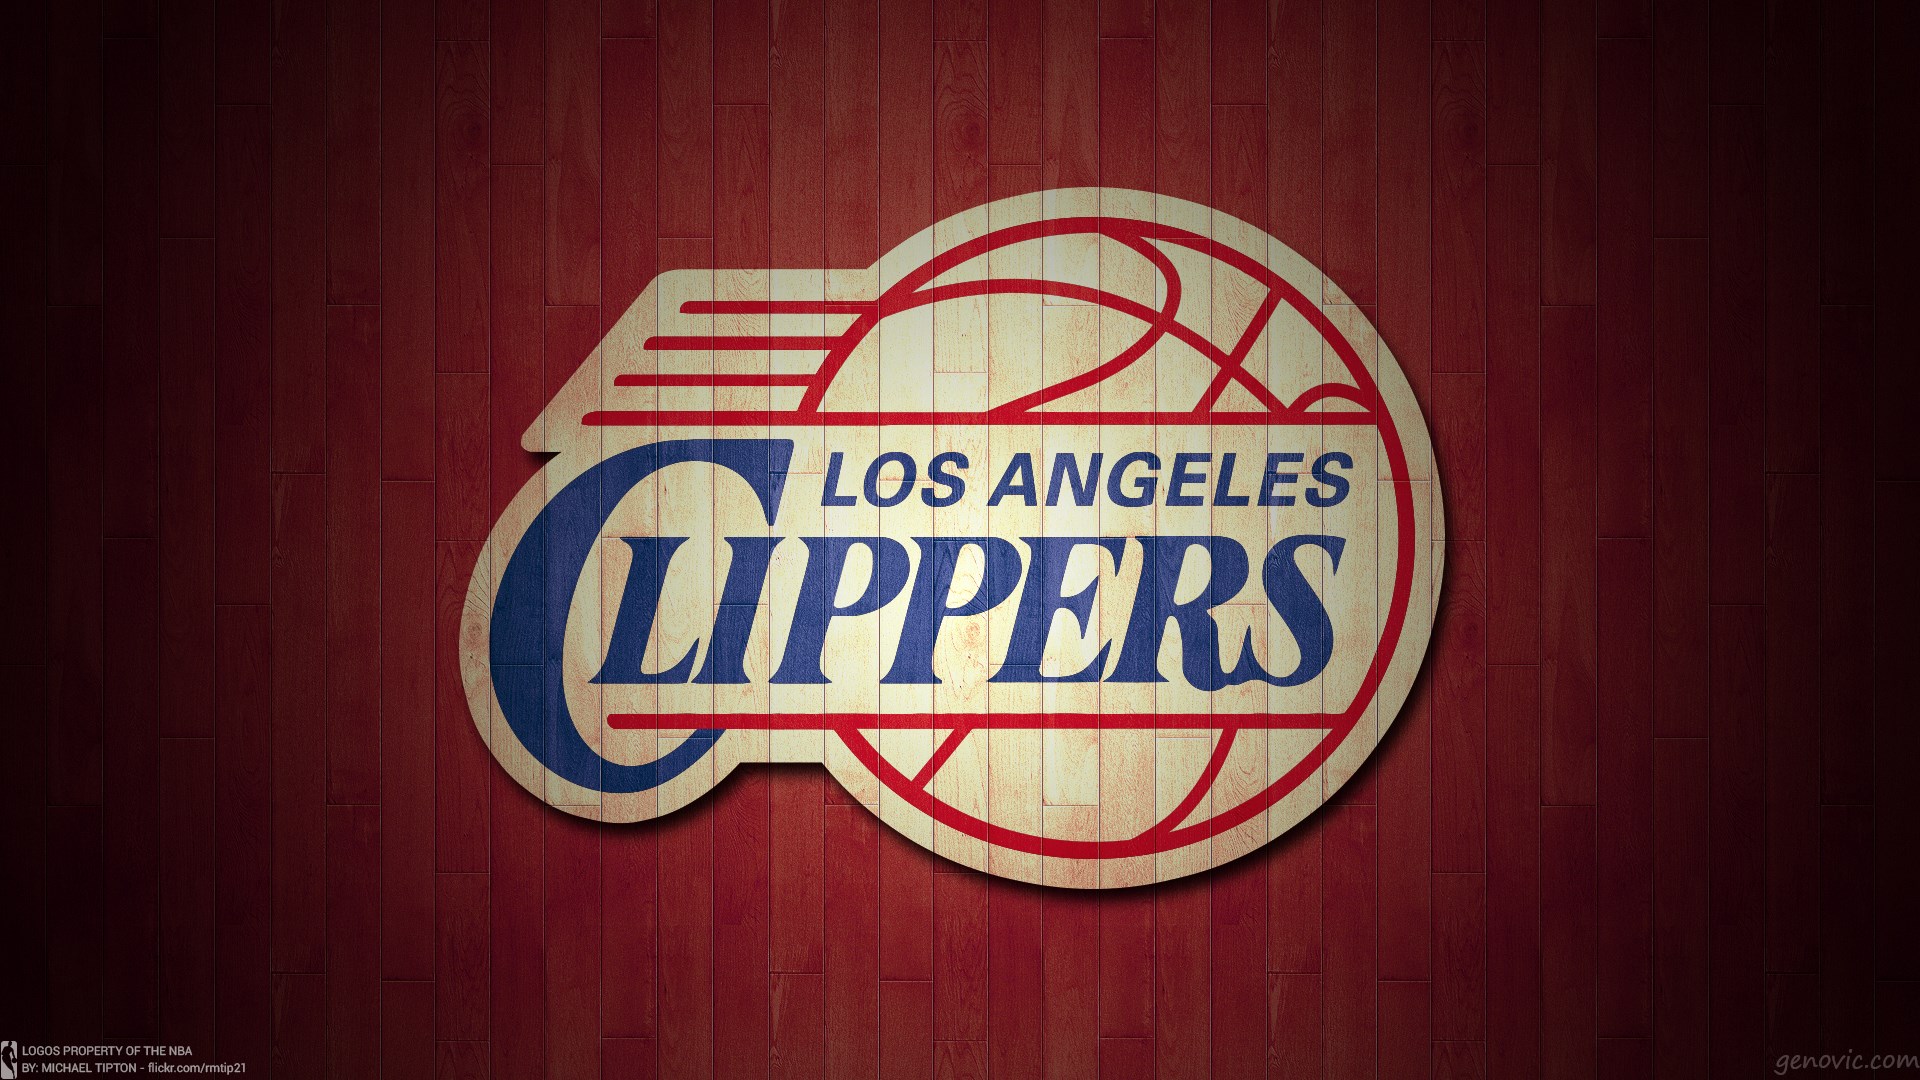 clippers wallpaper,logo,text,font,brand,signage